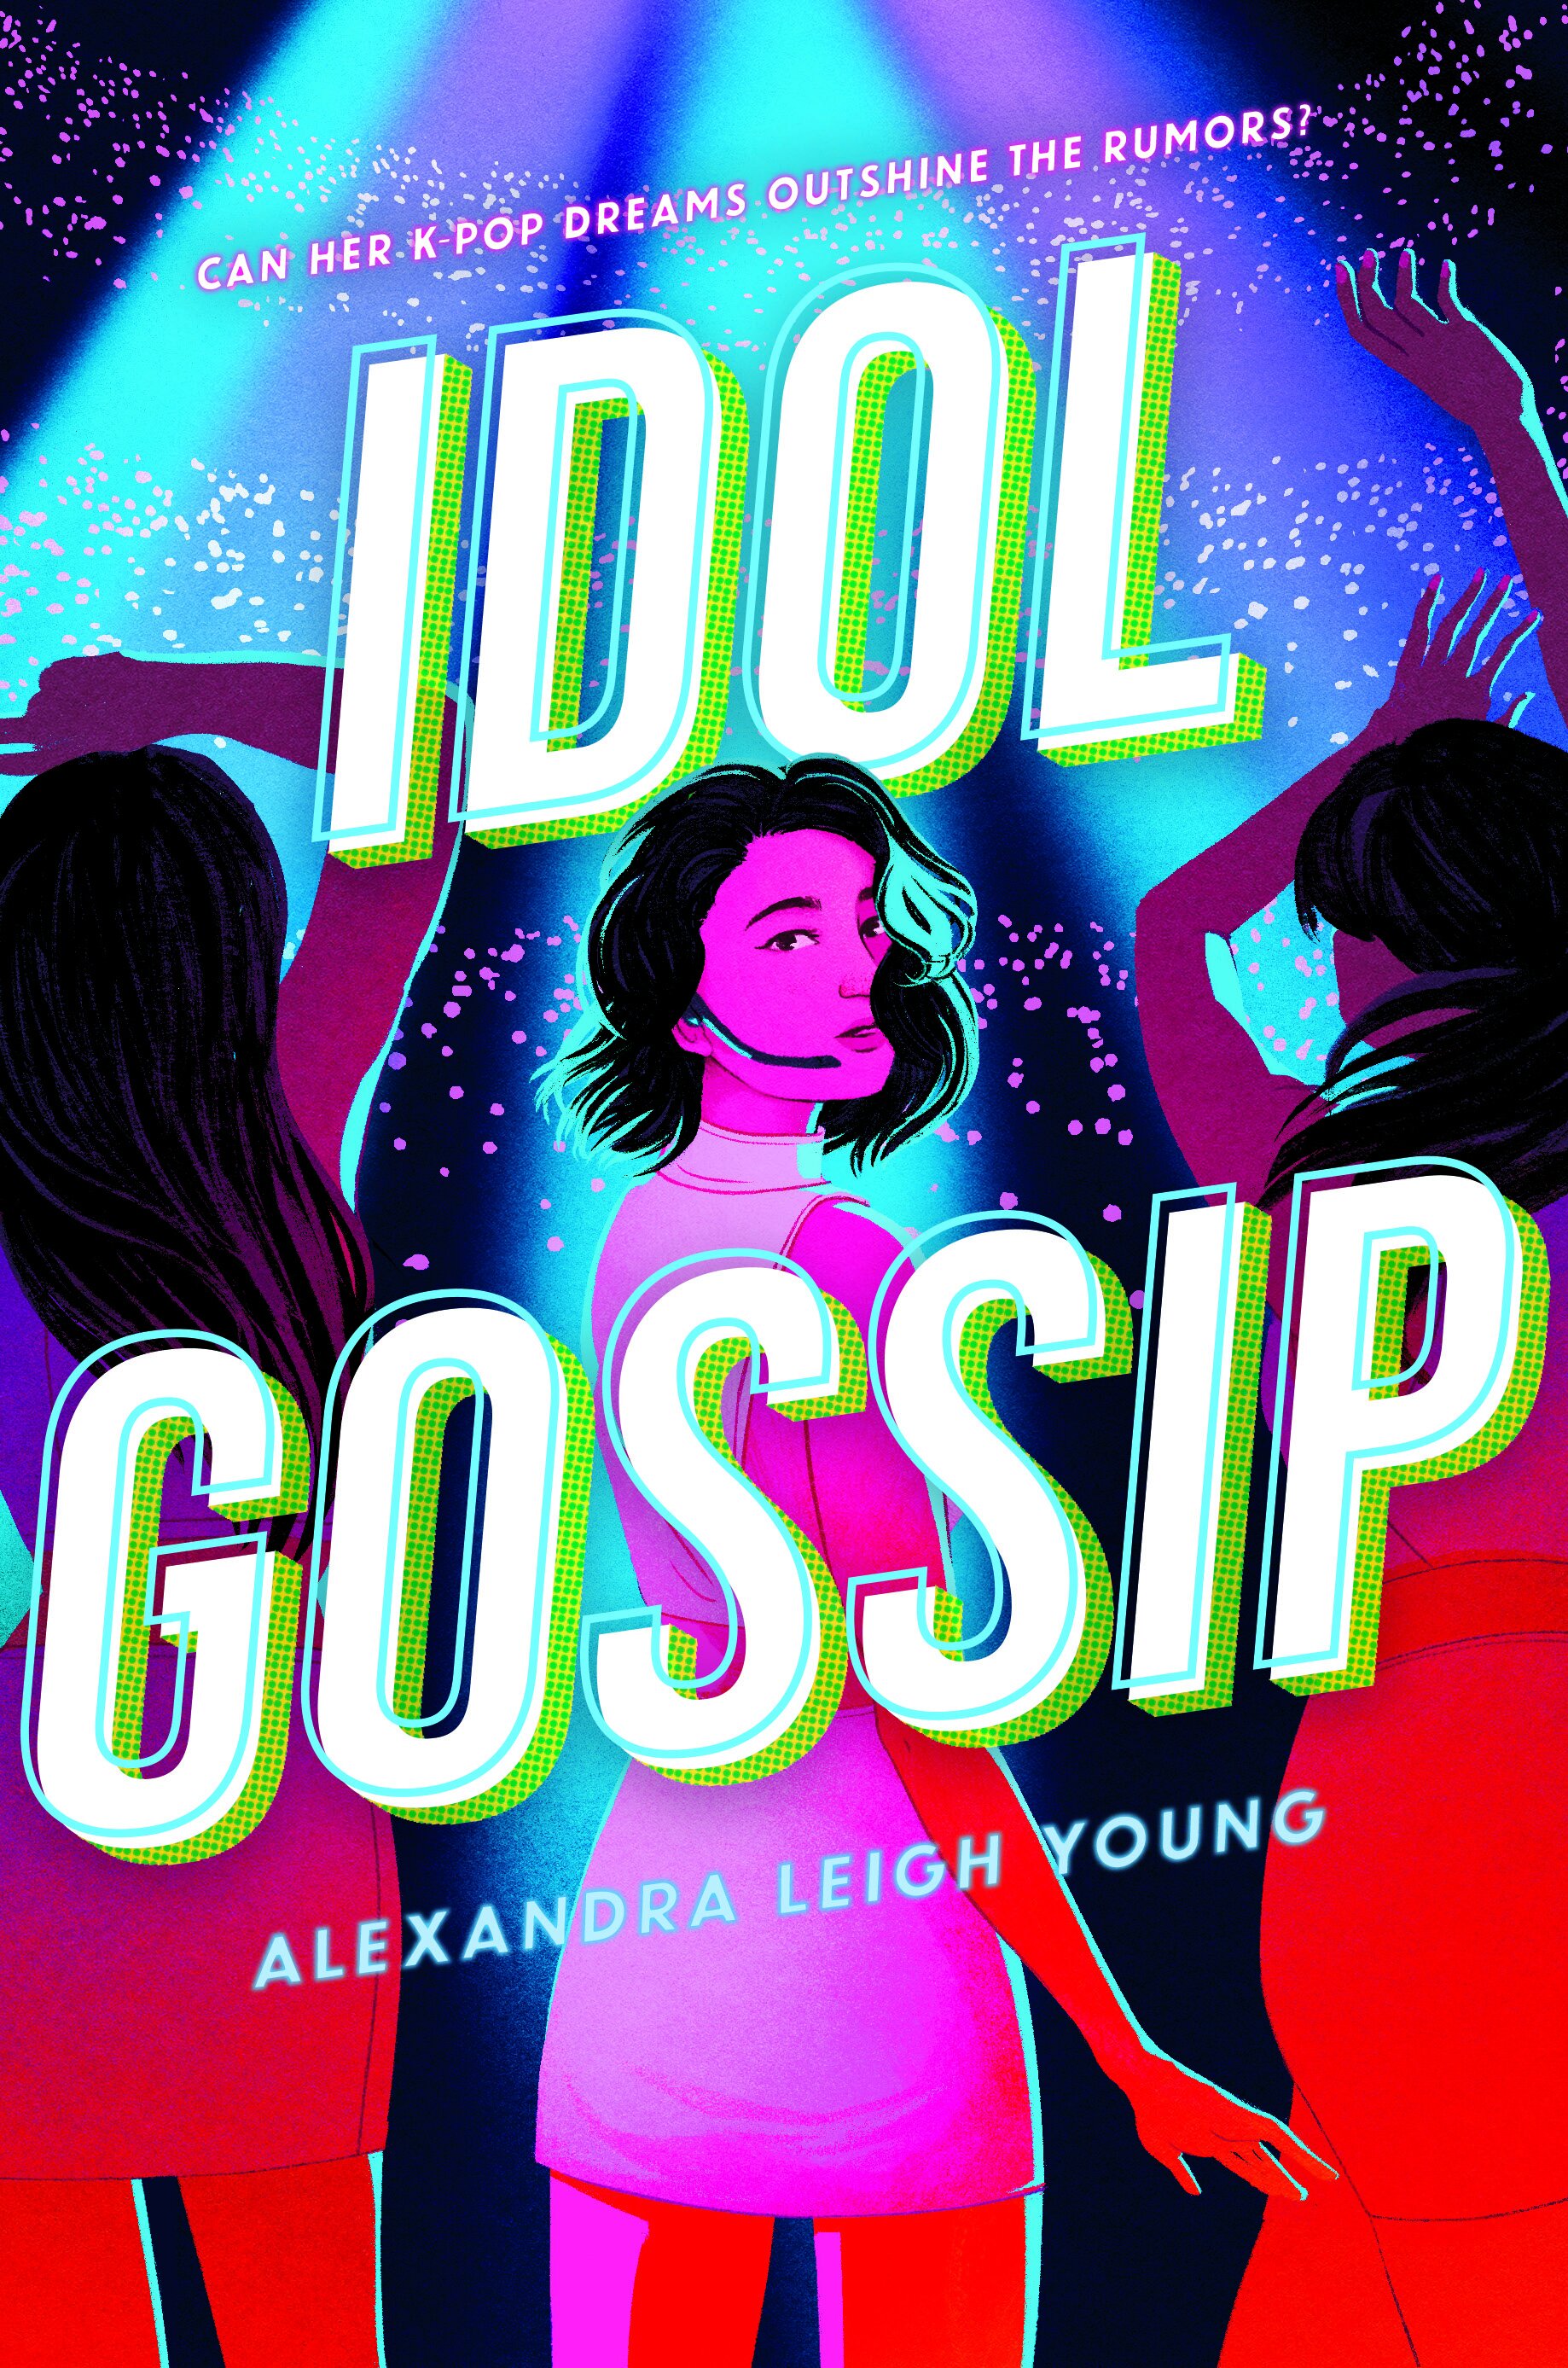 📚 Idol Gossip 📚 Alexandra Leigh Young ✨ Published 2021 ♤ Young Adult  Contemporary Fiction,..